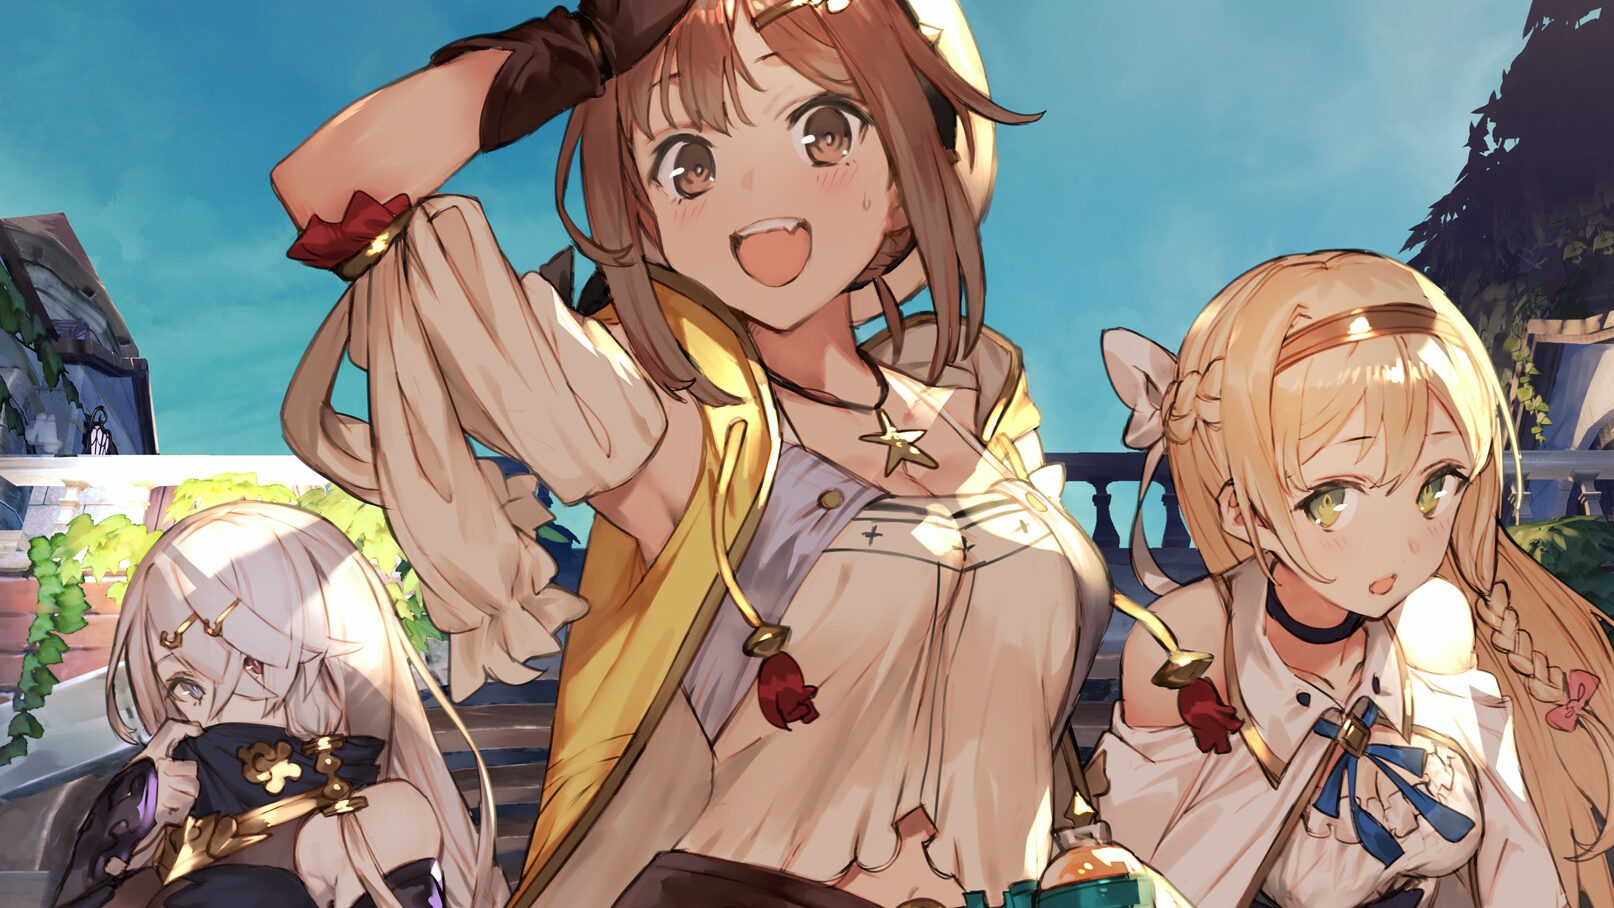 Atelier Ryza 2 Trophy List and How to get them